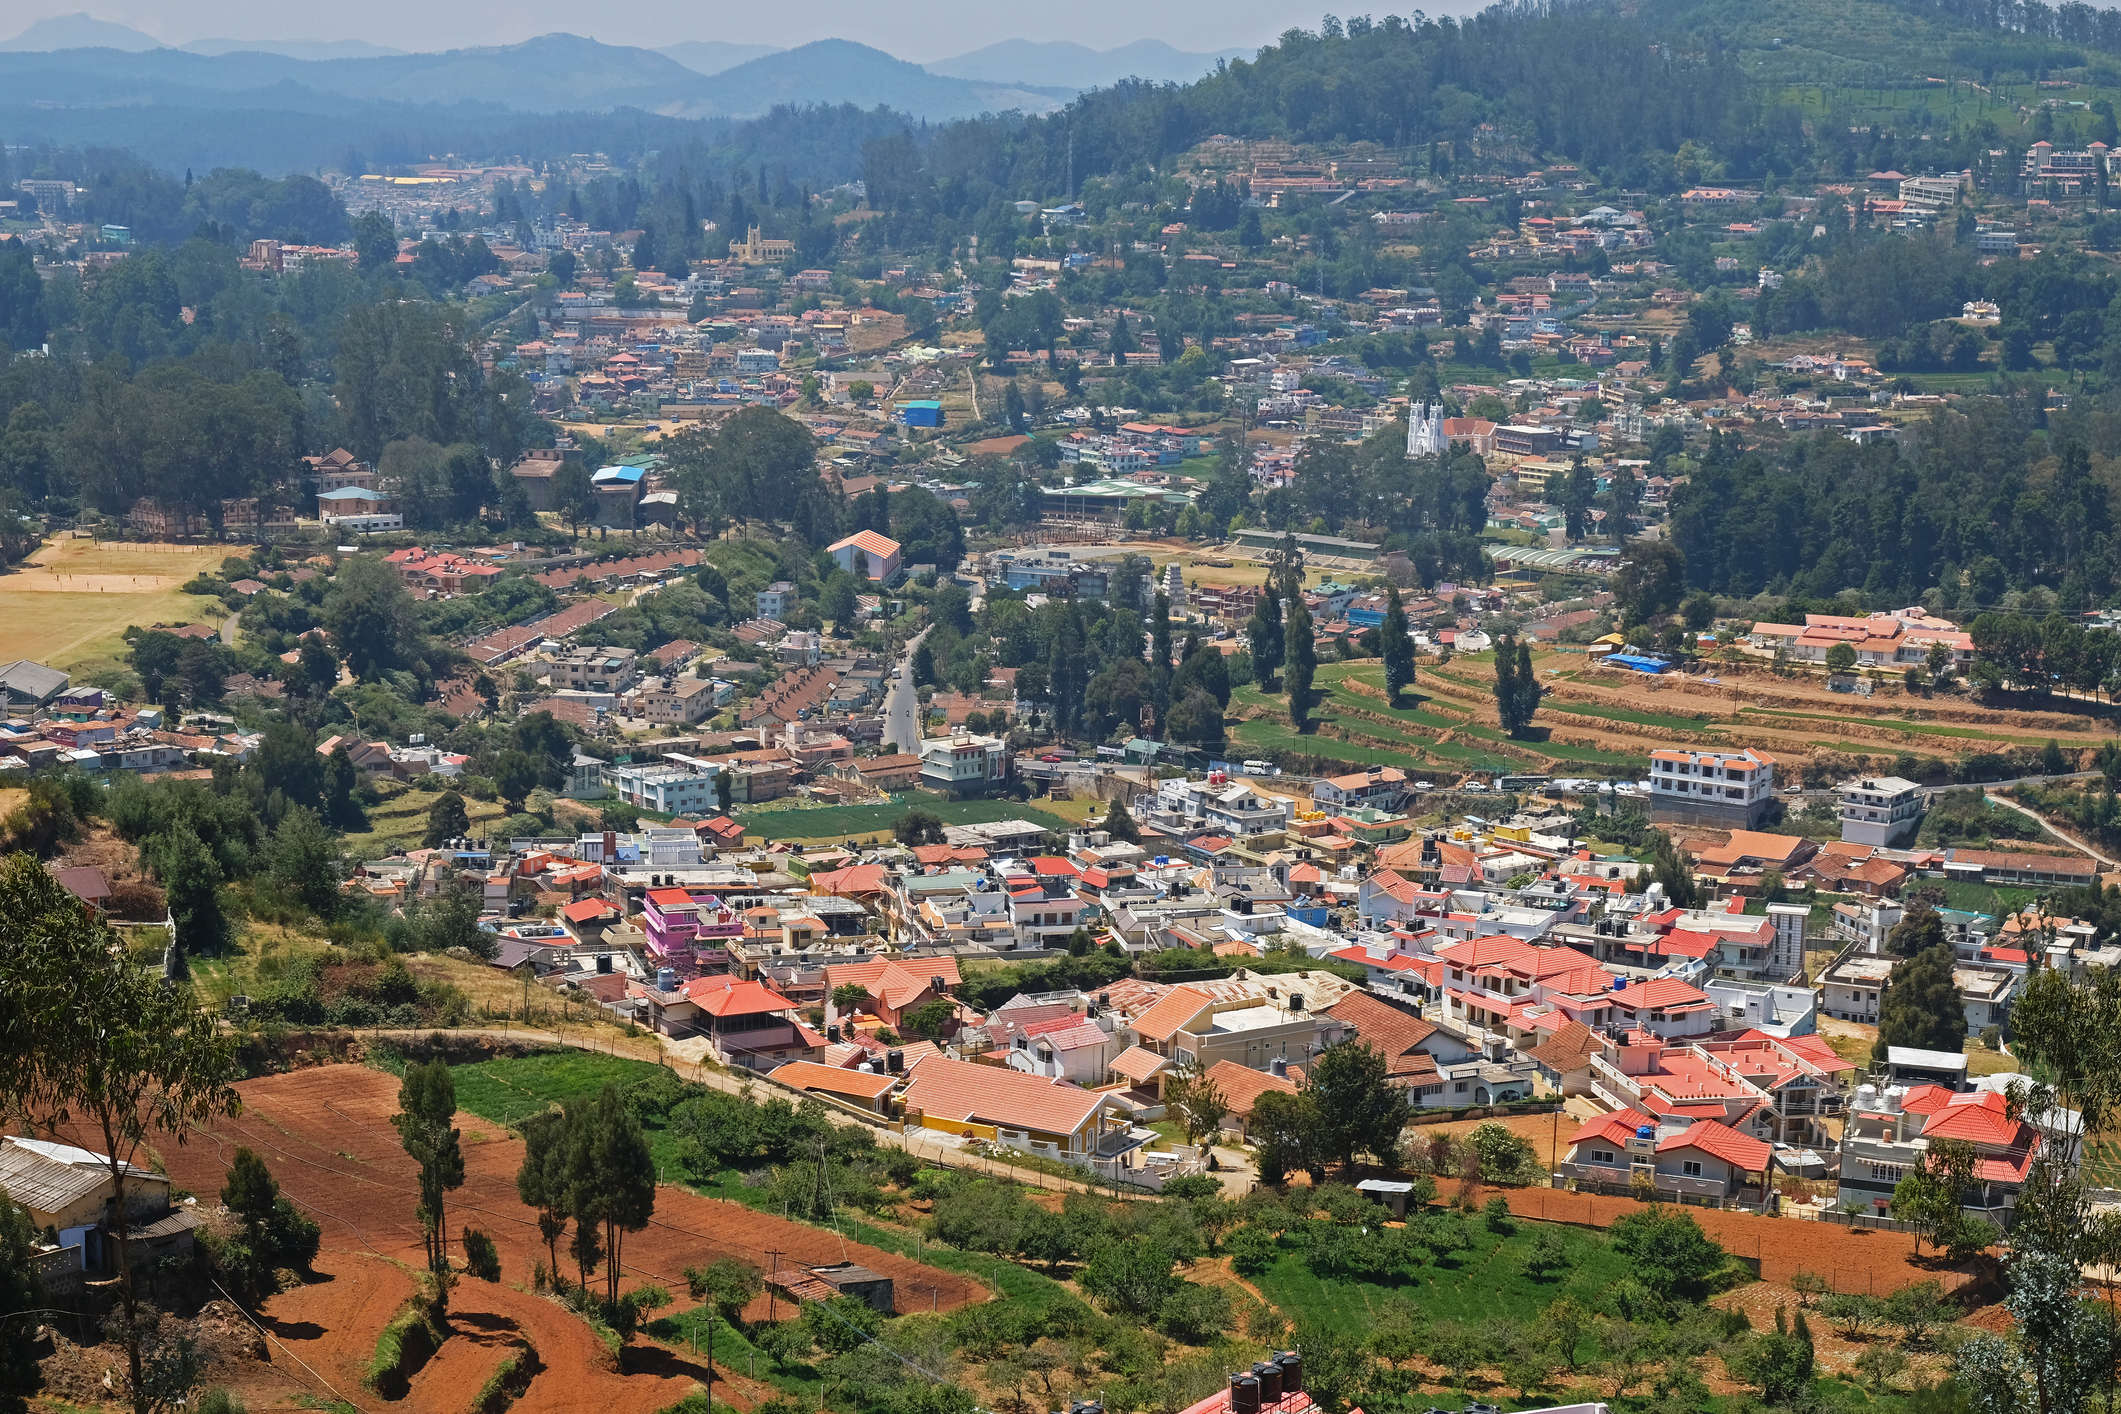 How to reach Ooty from Delhi?